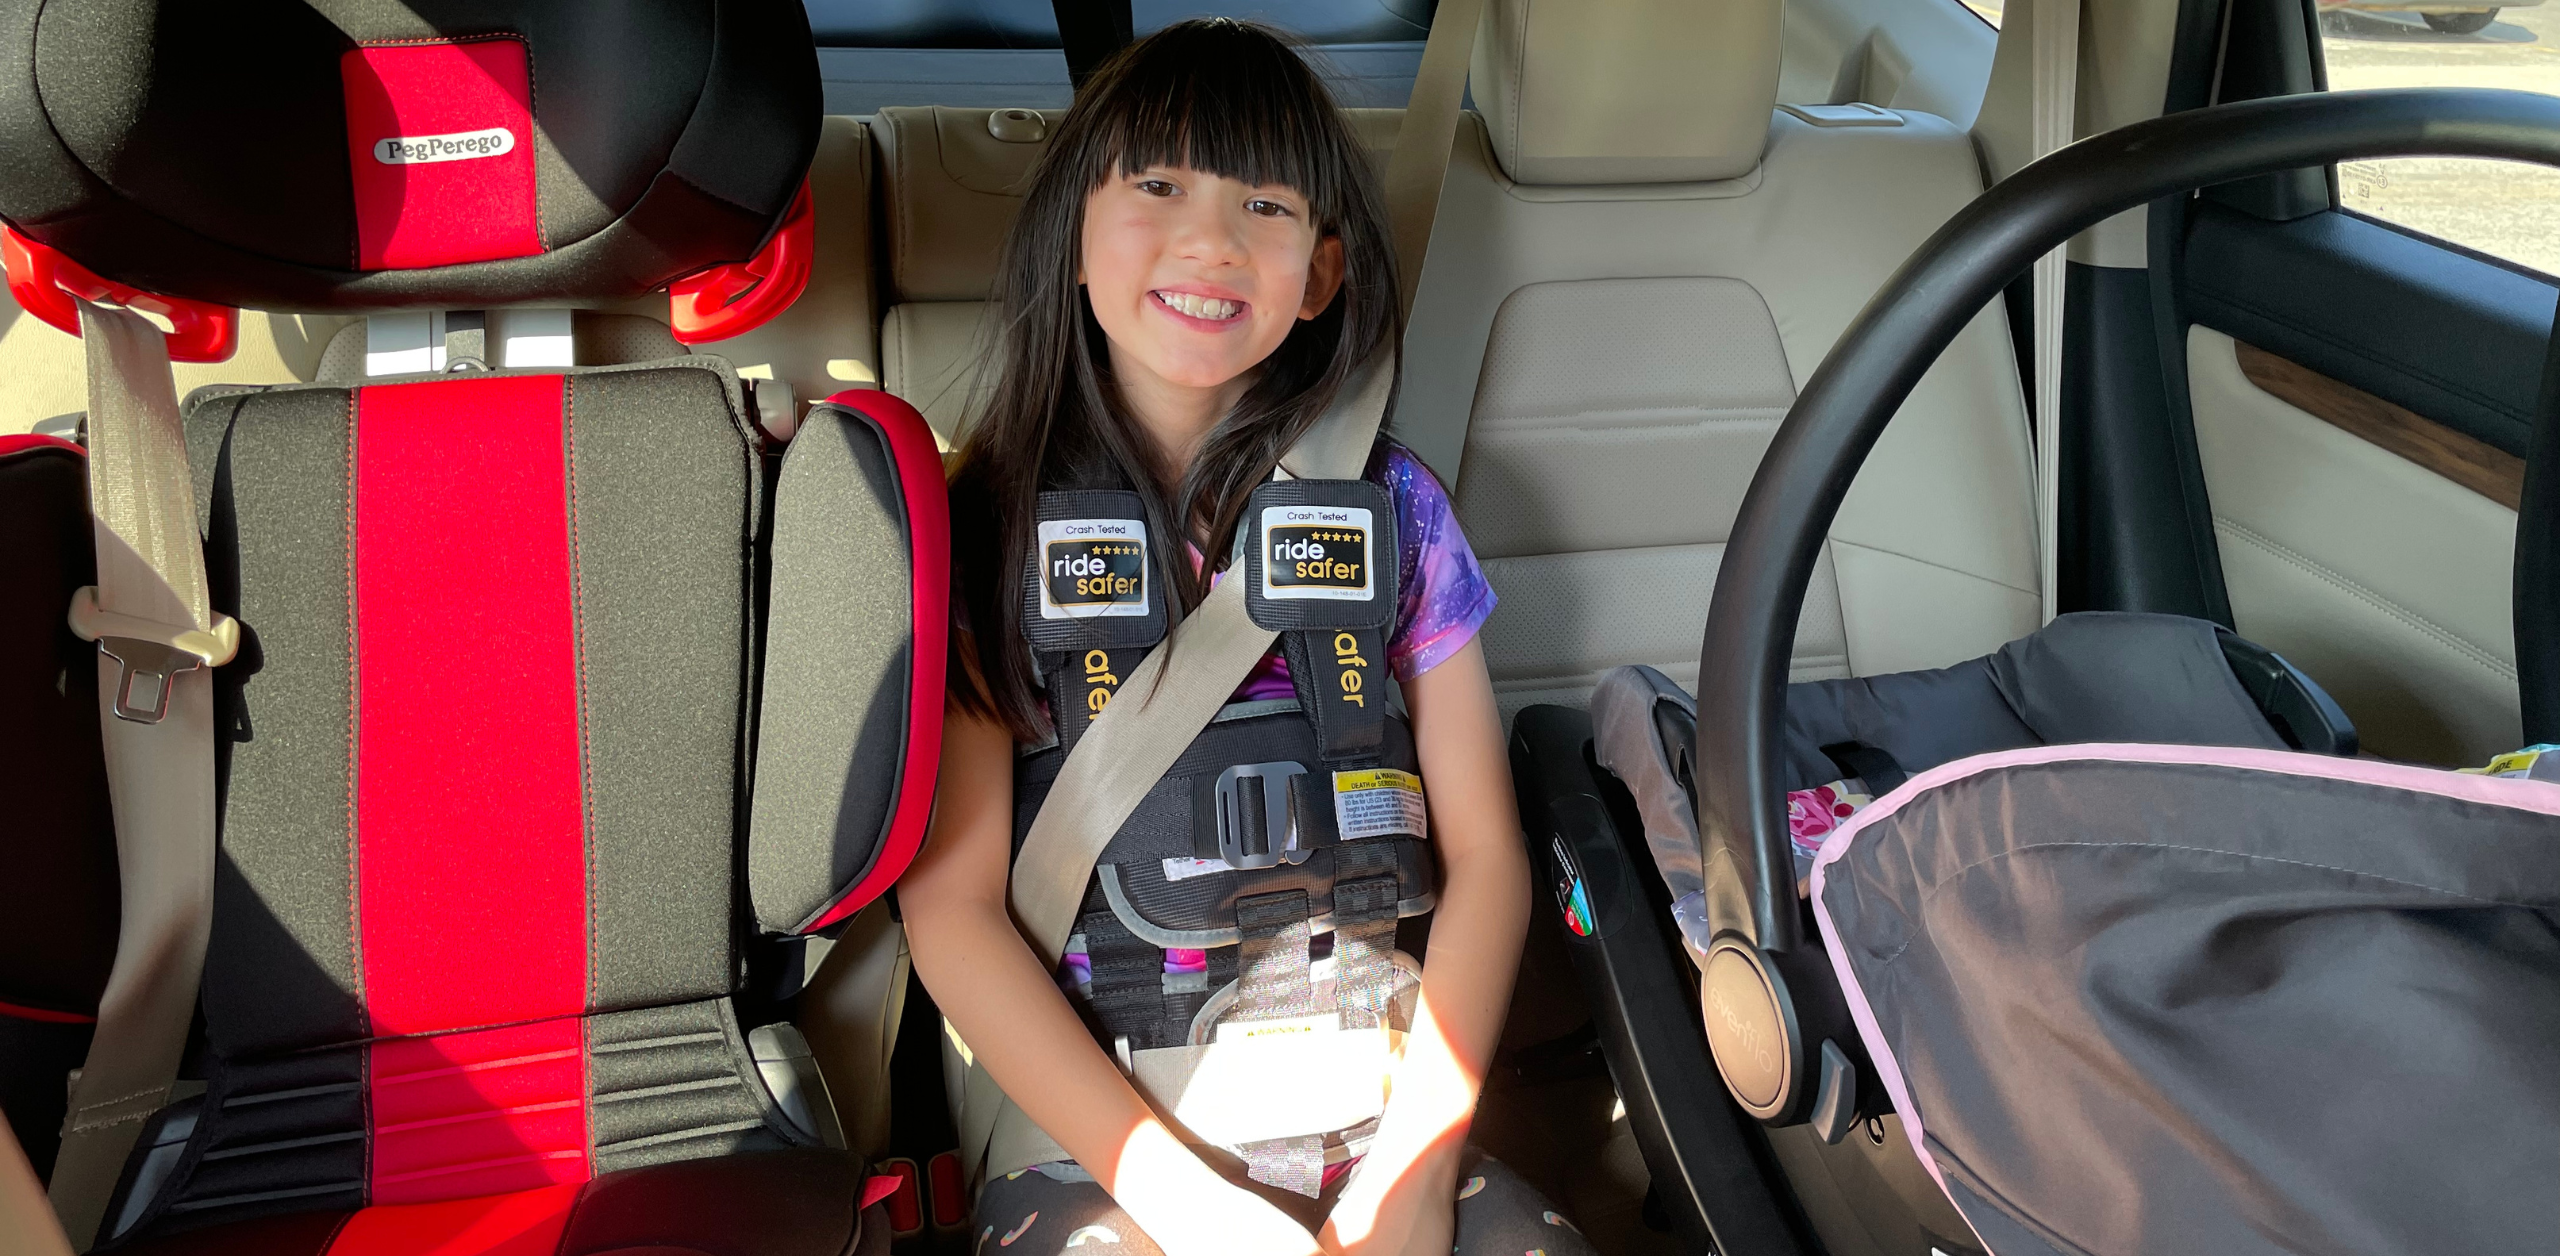 Car Seat Harness Straps: 5 Tips to Install